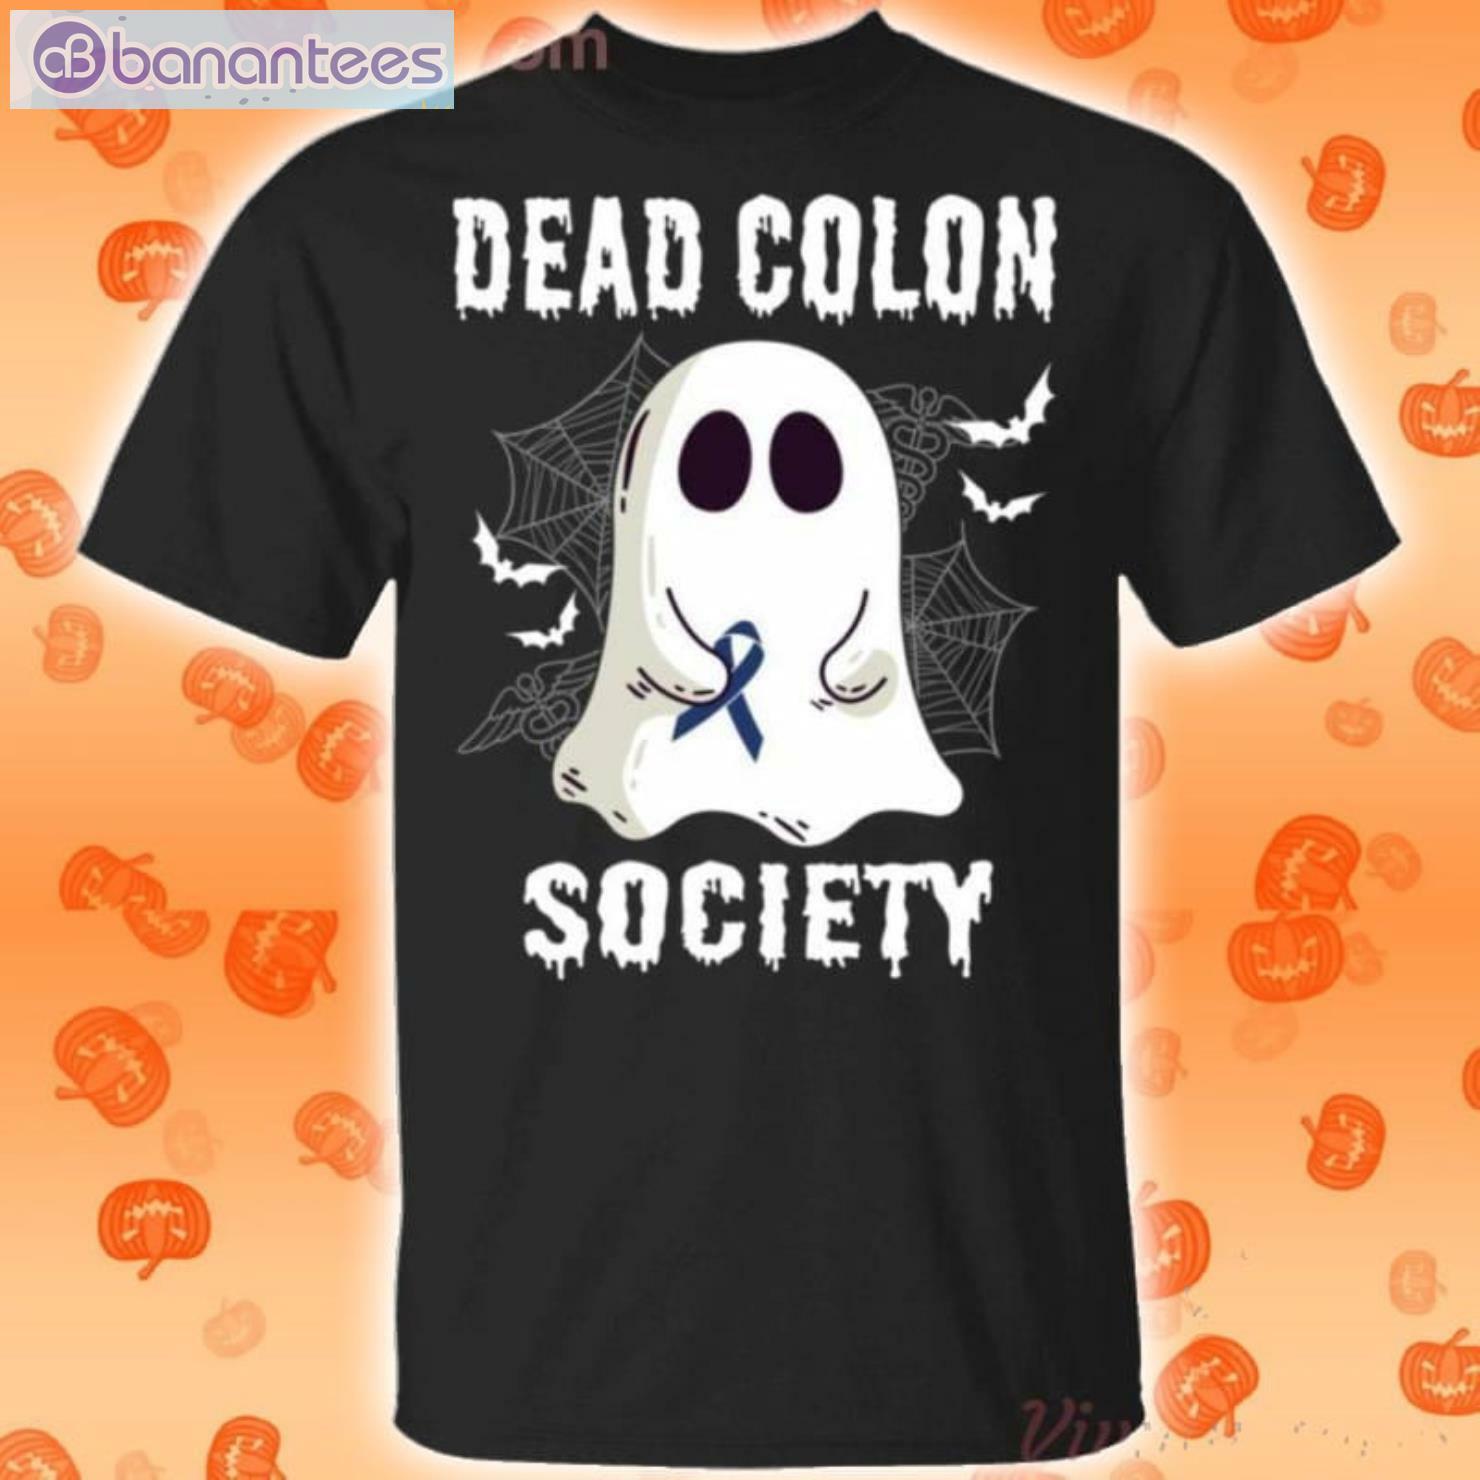 Dead Colon Society Boo Ghost Halloween Funny T-Shirt Product Photo 1 Product photo 1